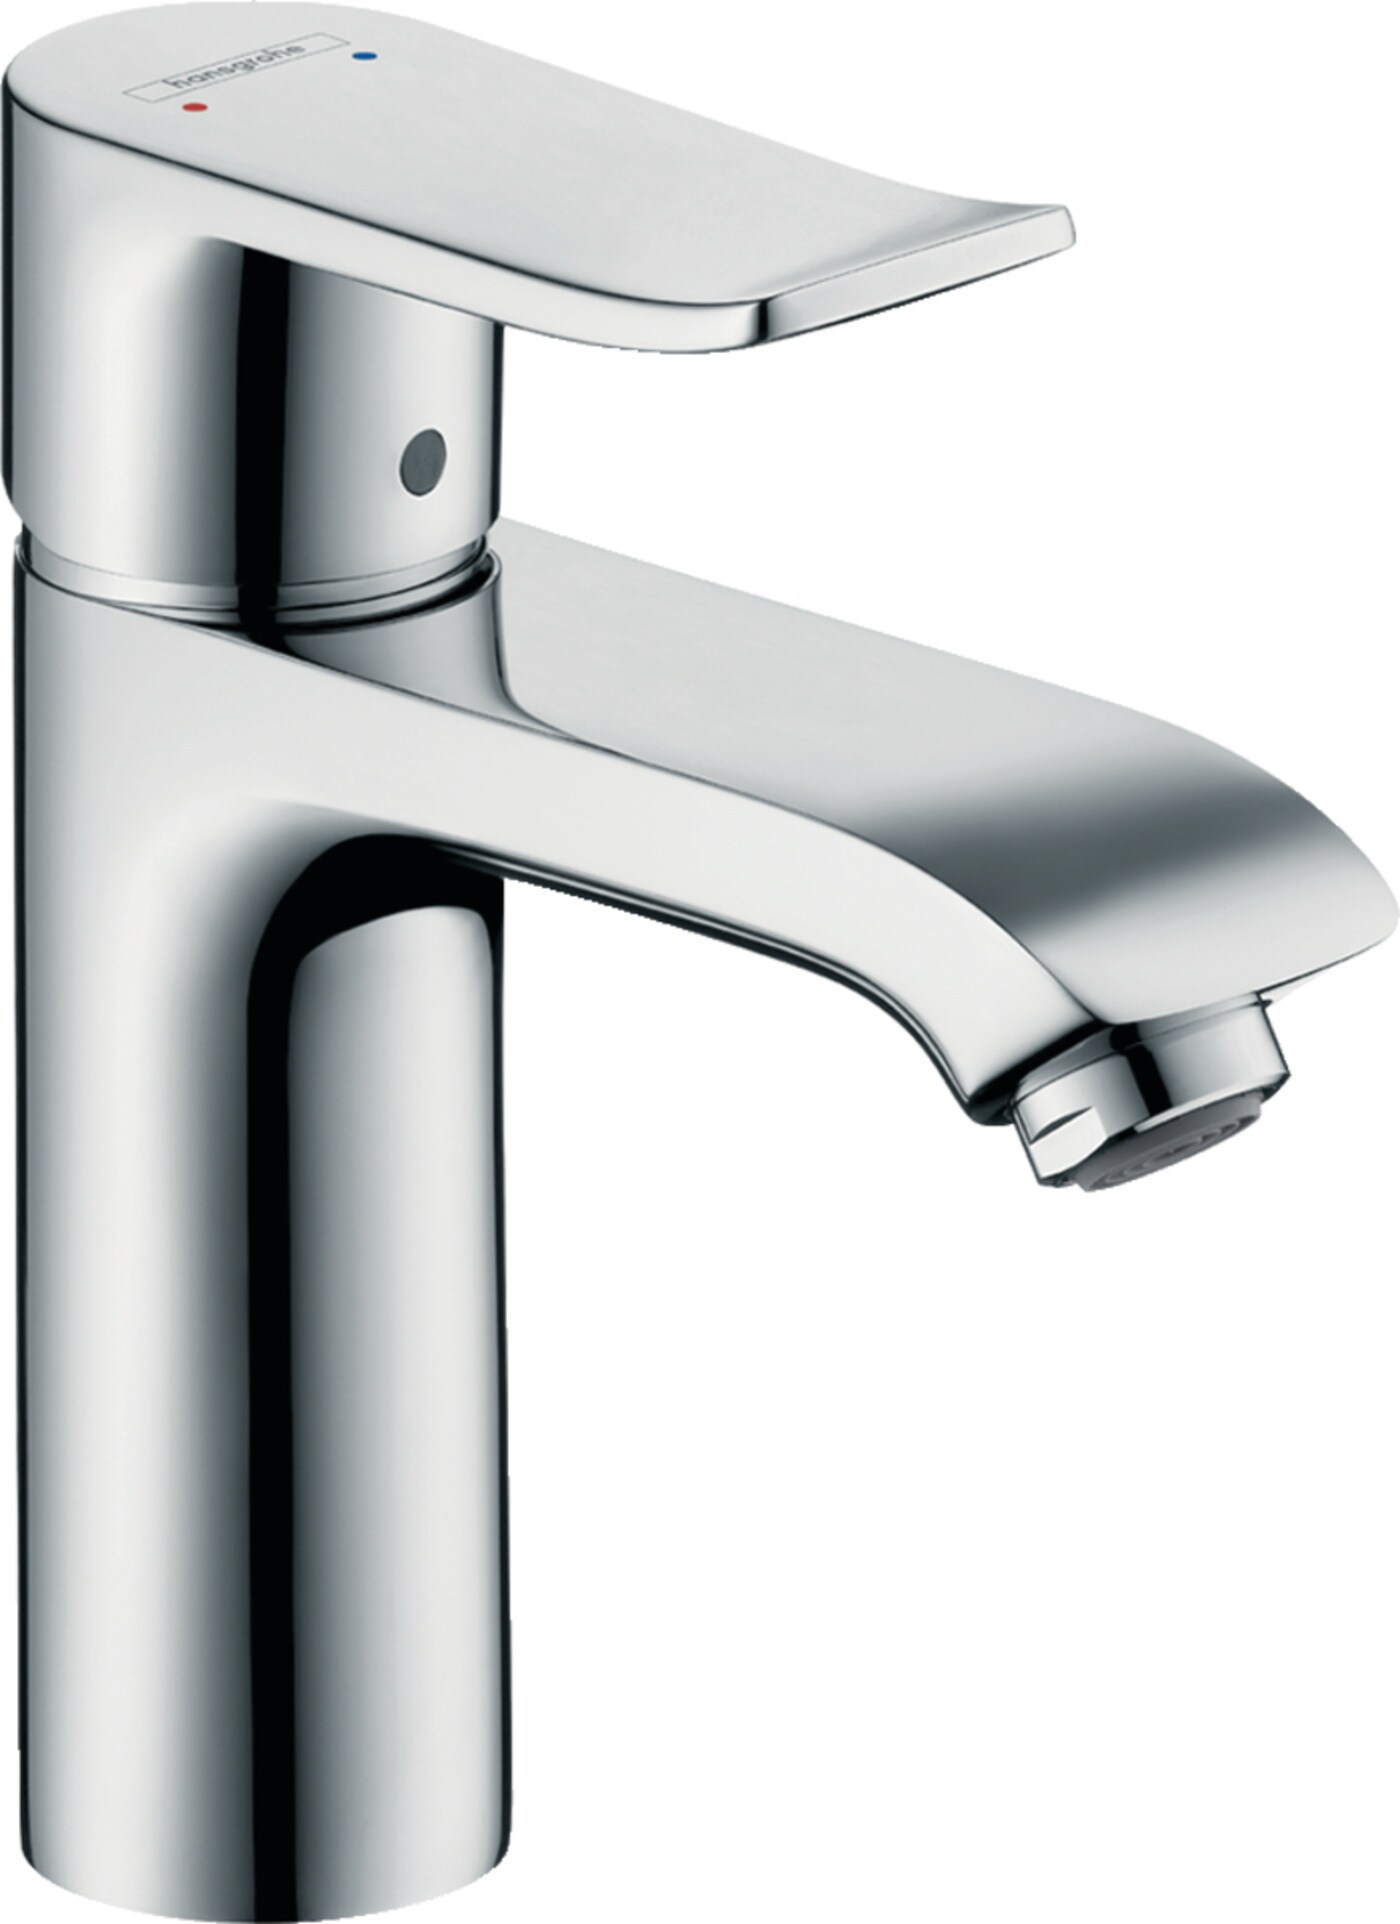 Hansgrohe Metris Chrome 1-handle Single Hole Low-arc Bathroom Sink Faucet  with Drain in the Bathroom Sink Faucets department at Lowes.com